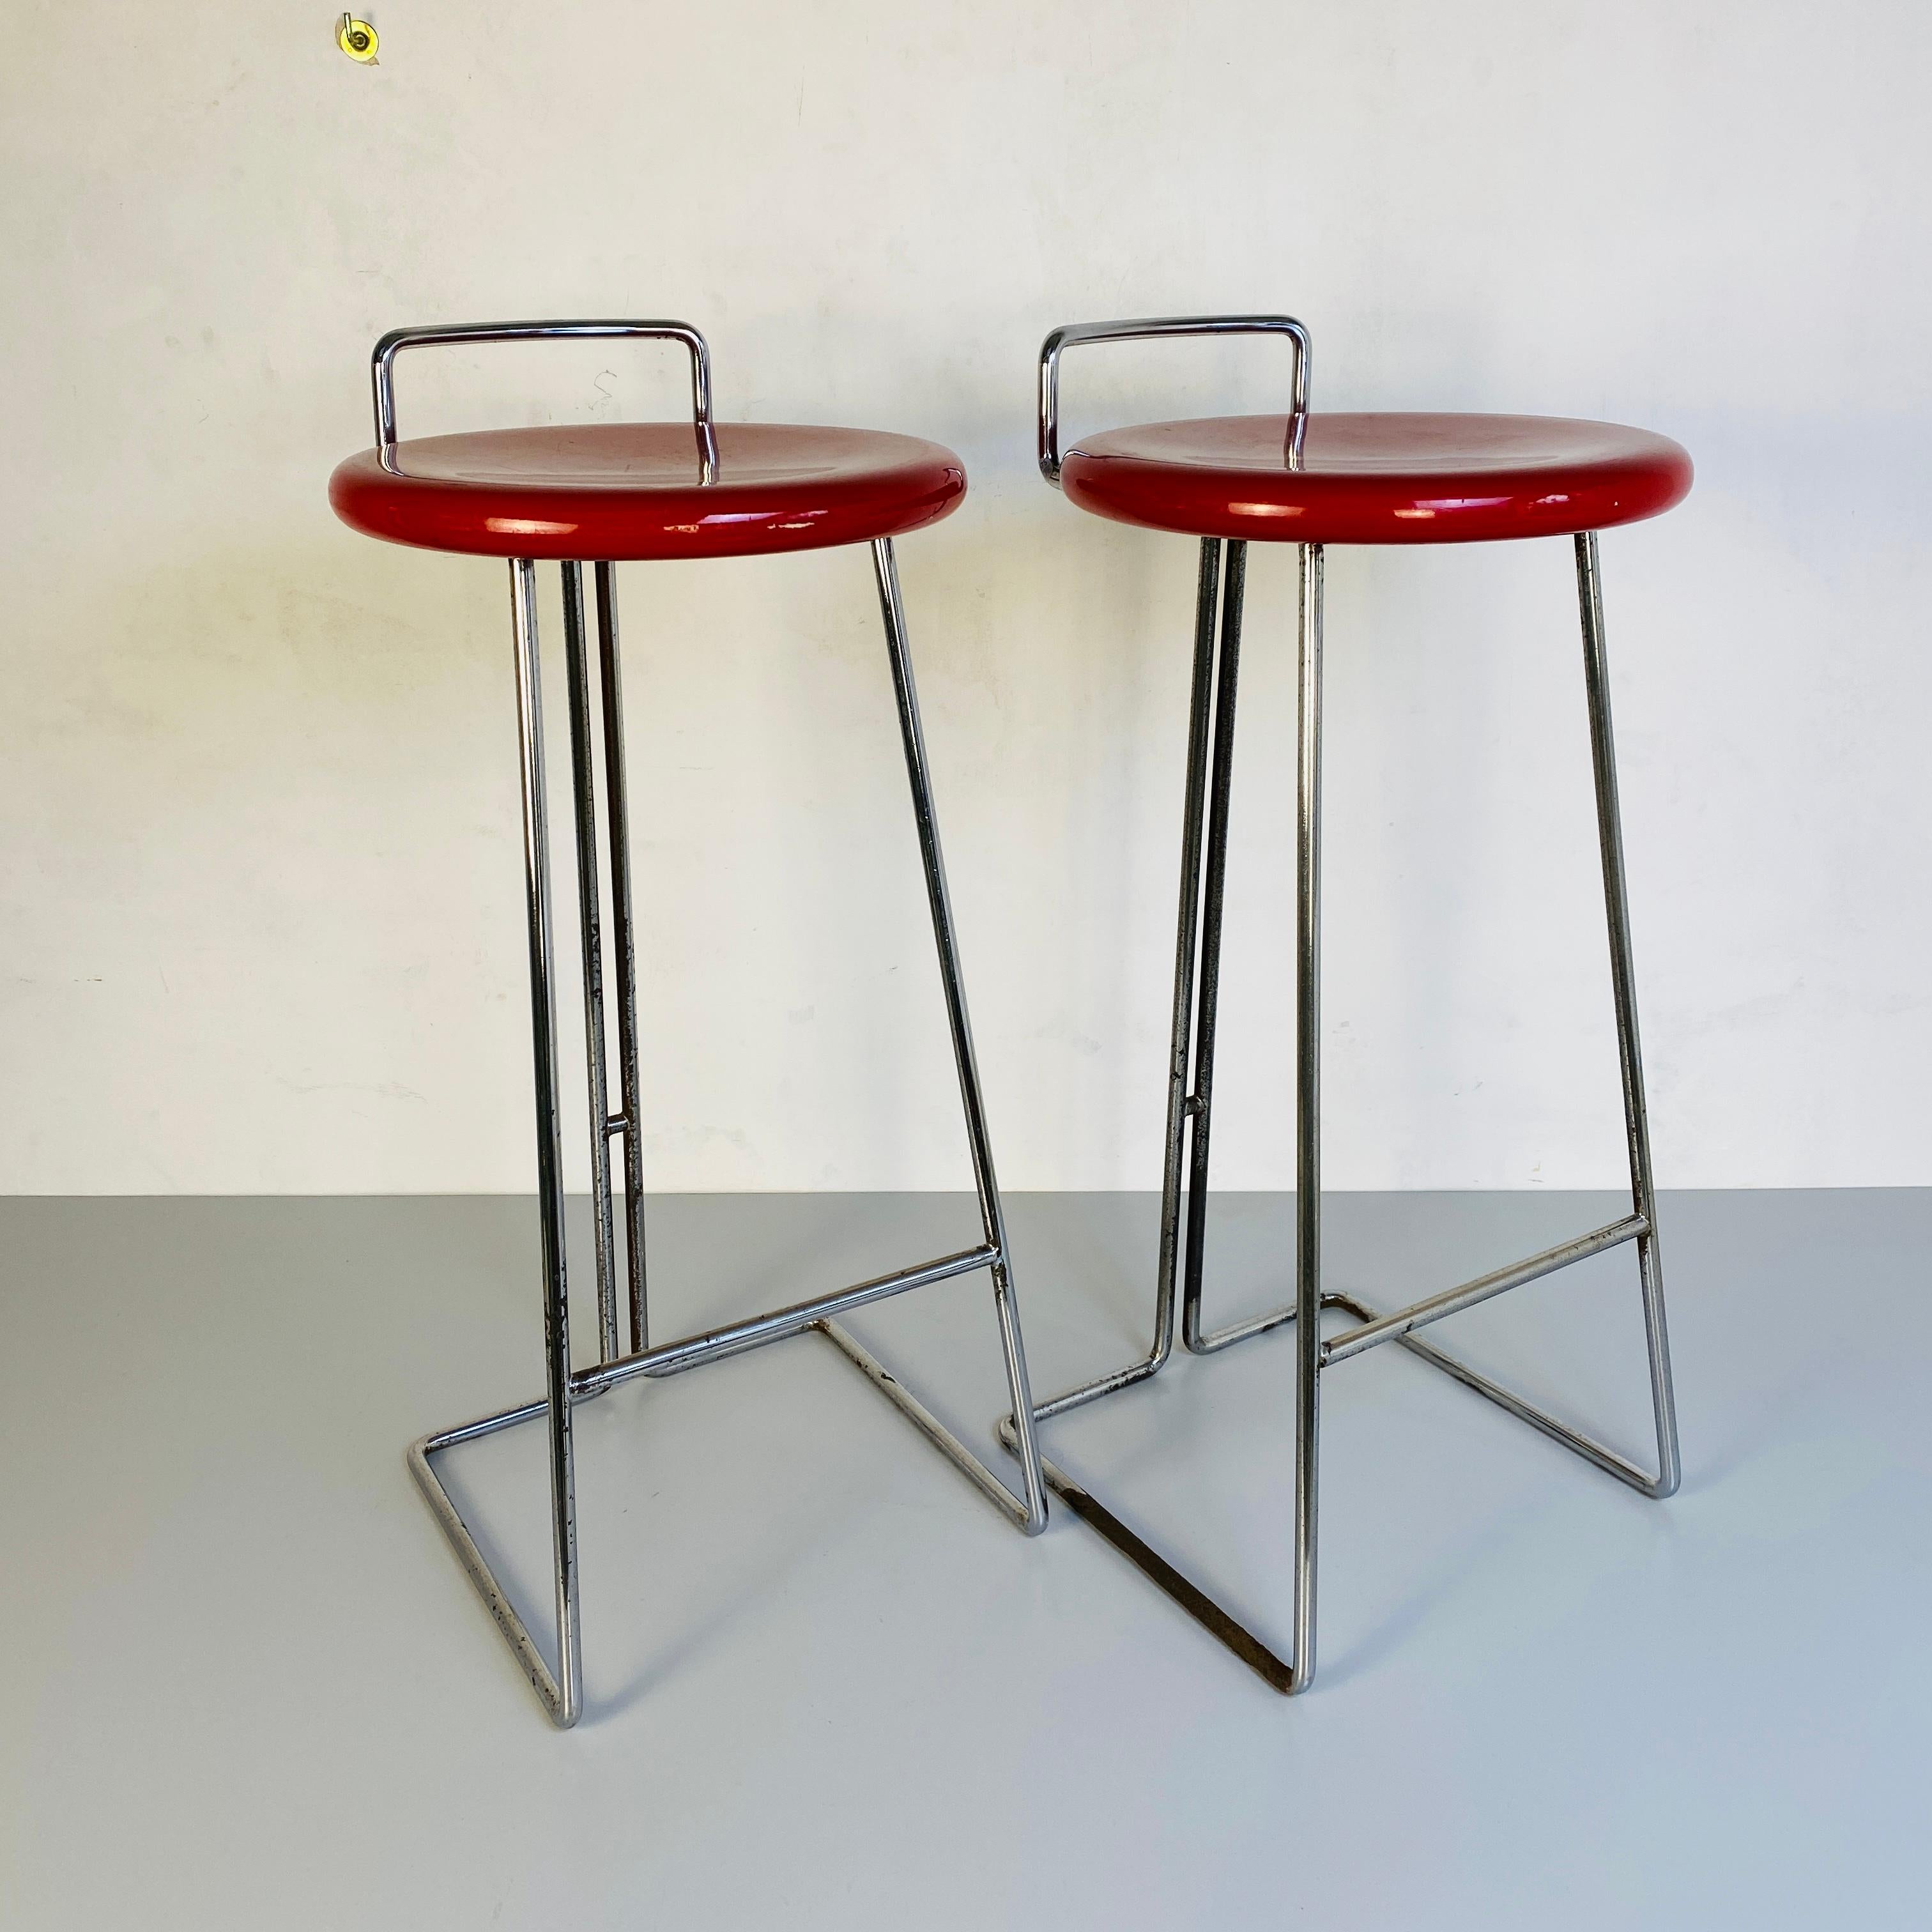 Italian Mid-Century Modern set of high red metal stools by Dada, 1980s
Set of high stools with chromed metal structure and round seat in red painted metal.
By Dada, made in Italy.

Good condition, chrome plating skipped in some places visible in